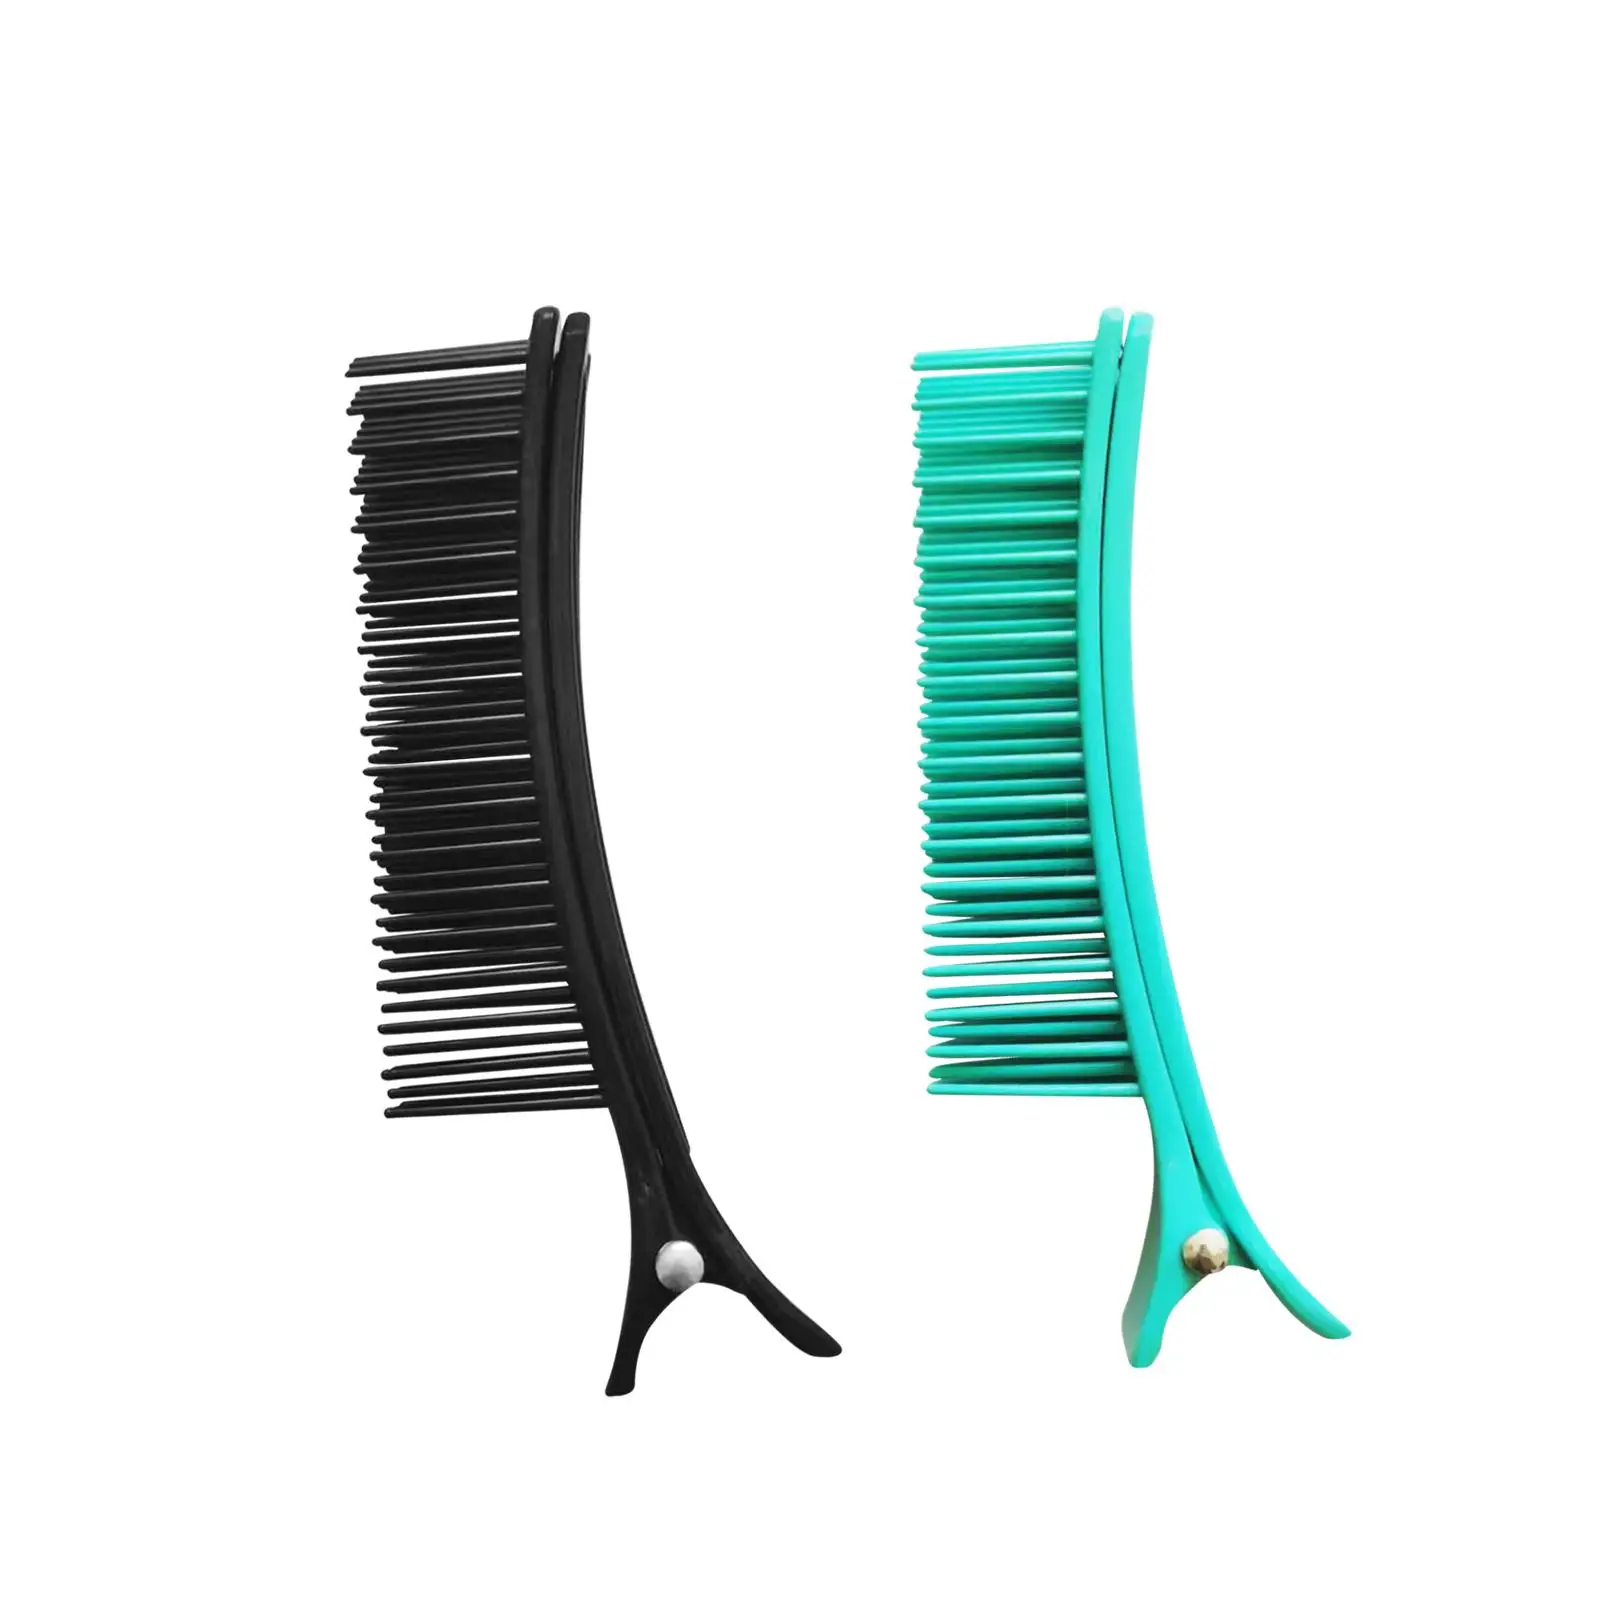 Hair Sectioning Clips Tools Hairstyling Portable Hair Styling Tool Salon Drying Perm Dyeing Hairstyling Tool DIY Home for Salon